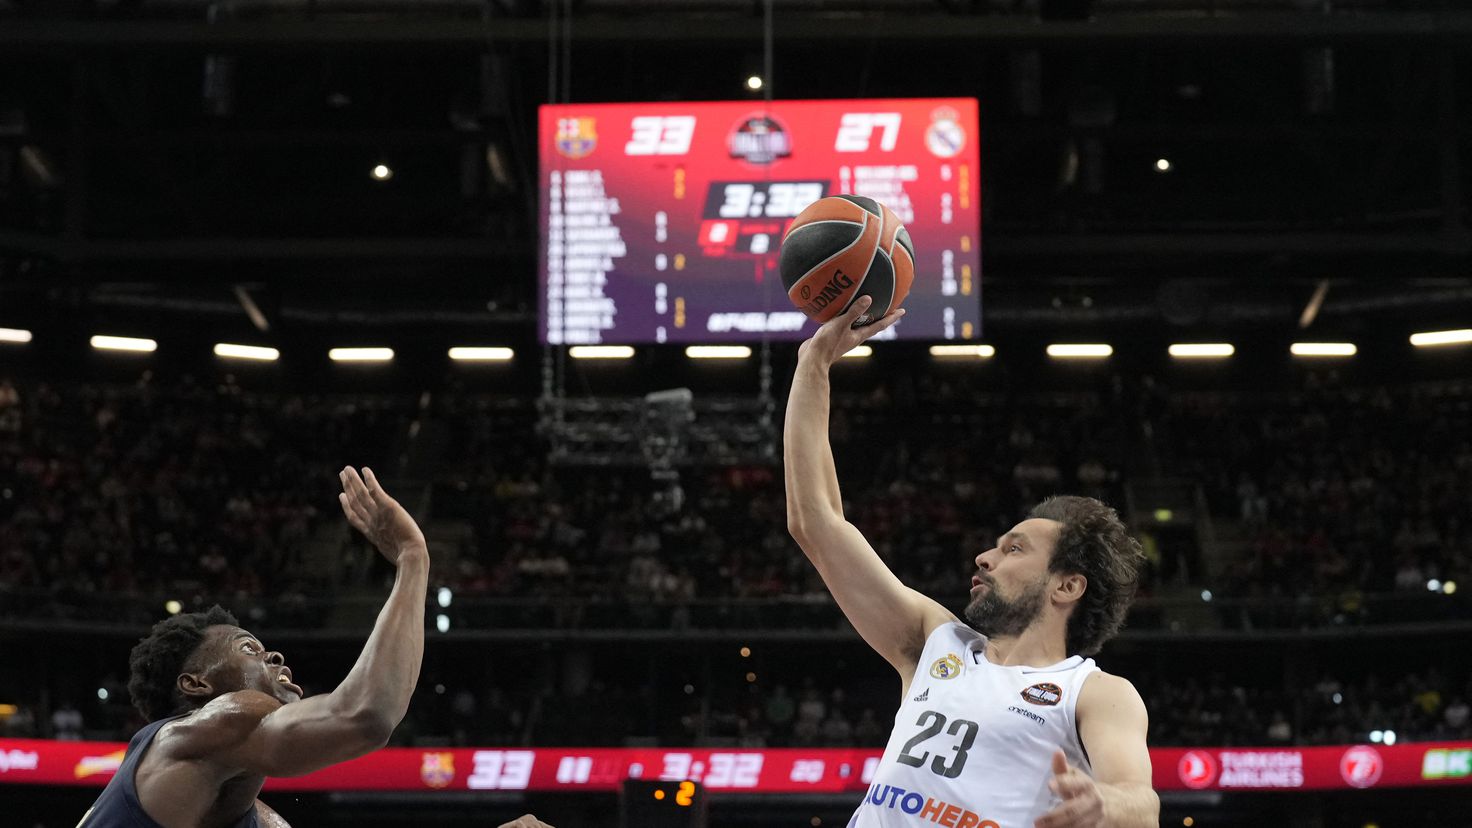 Sergio Llull, all-time top scorer in the Final Four
